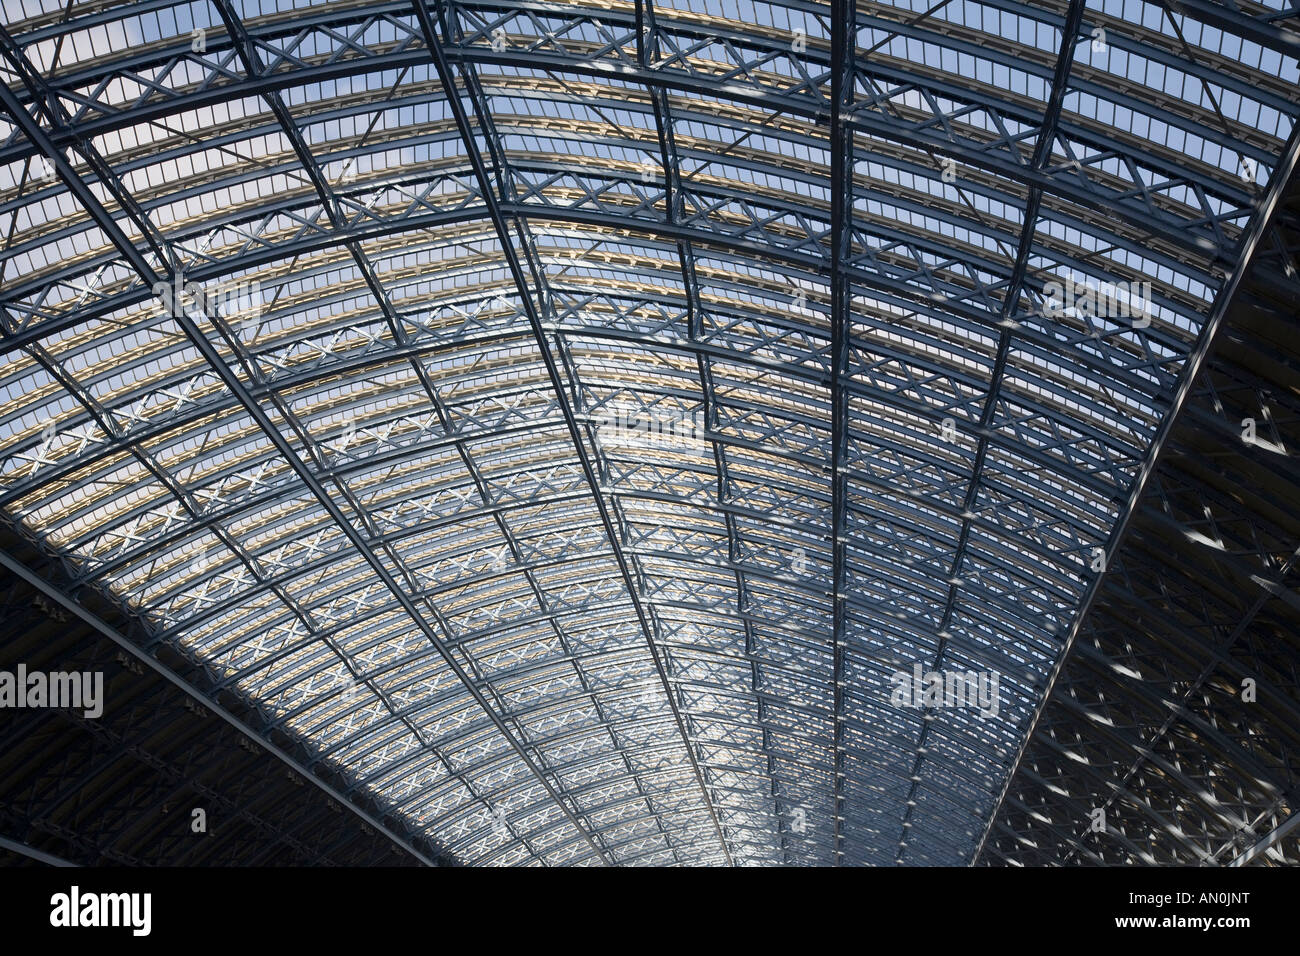 A view of the iron framework supporting the roof of the recently refurbished St Pancras International train station, London. Stock Photo